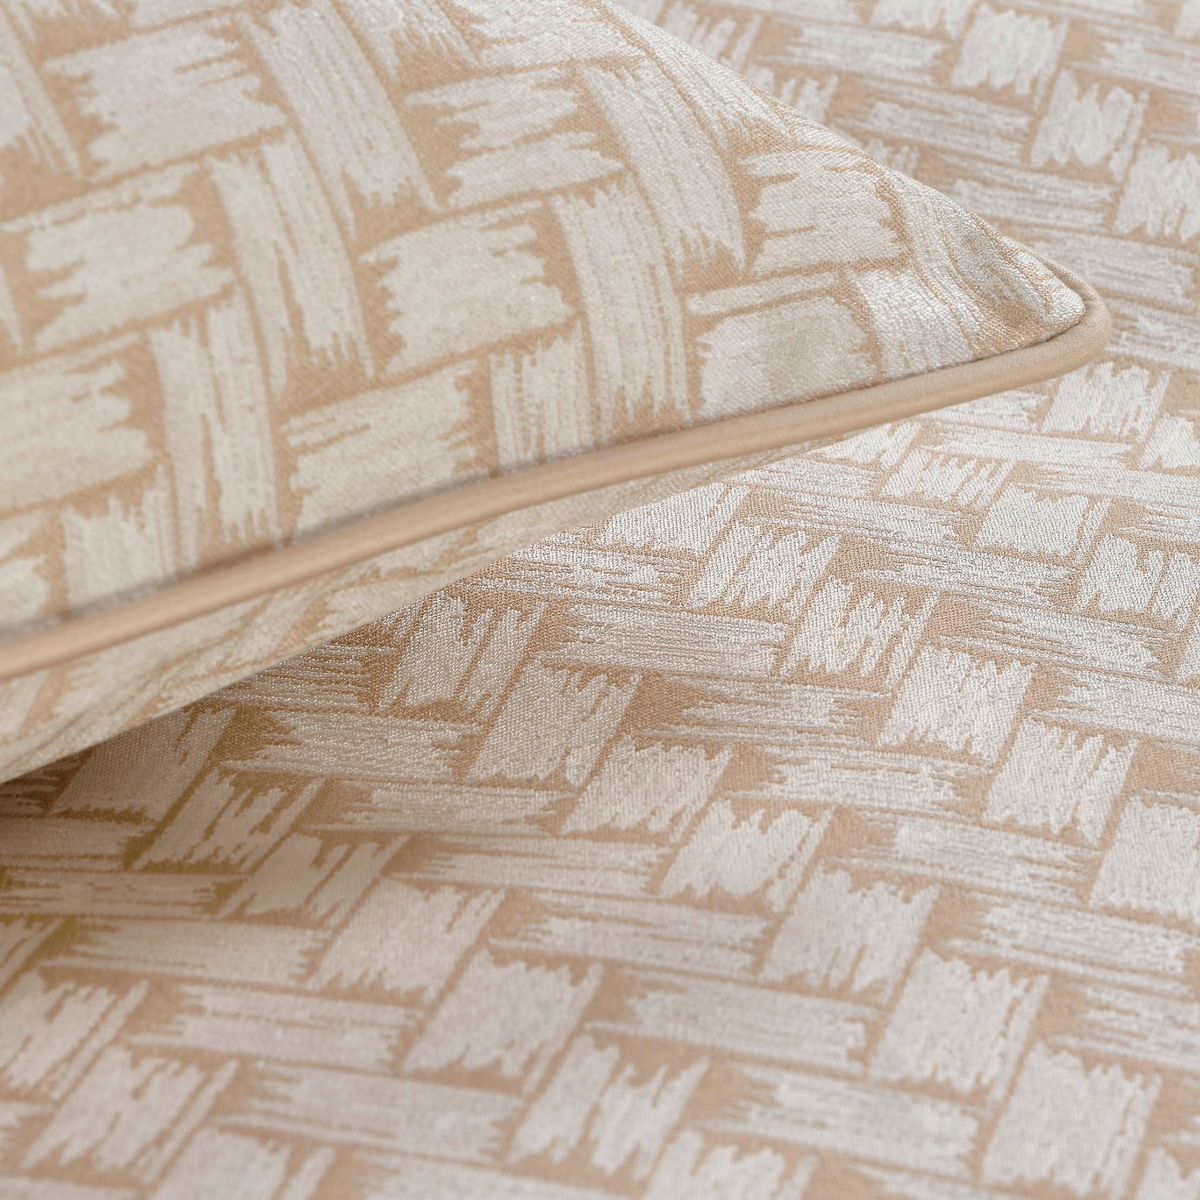 Pattern of Celso de Lemos Twined Collection in Powder Color